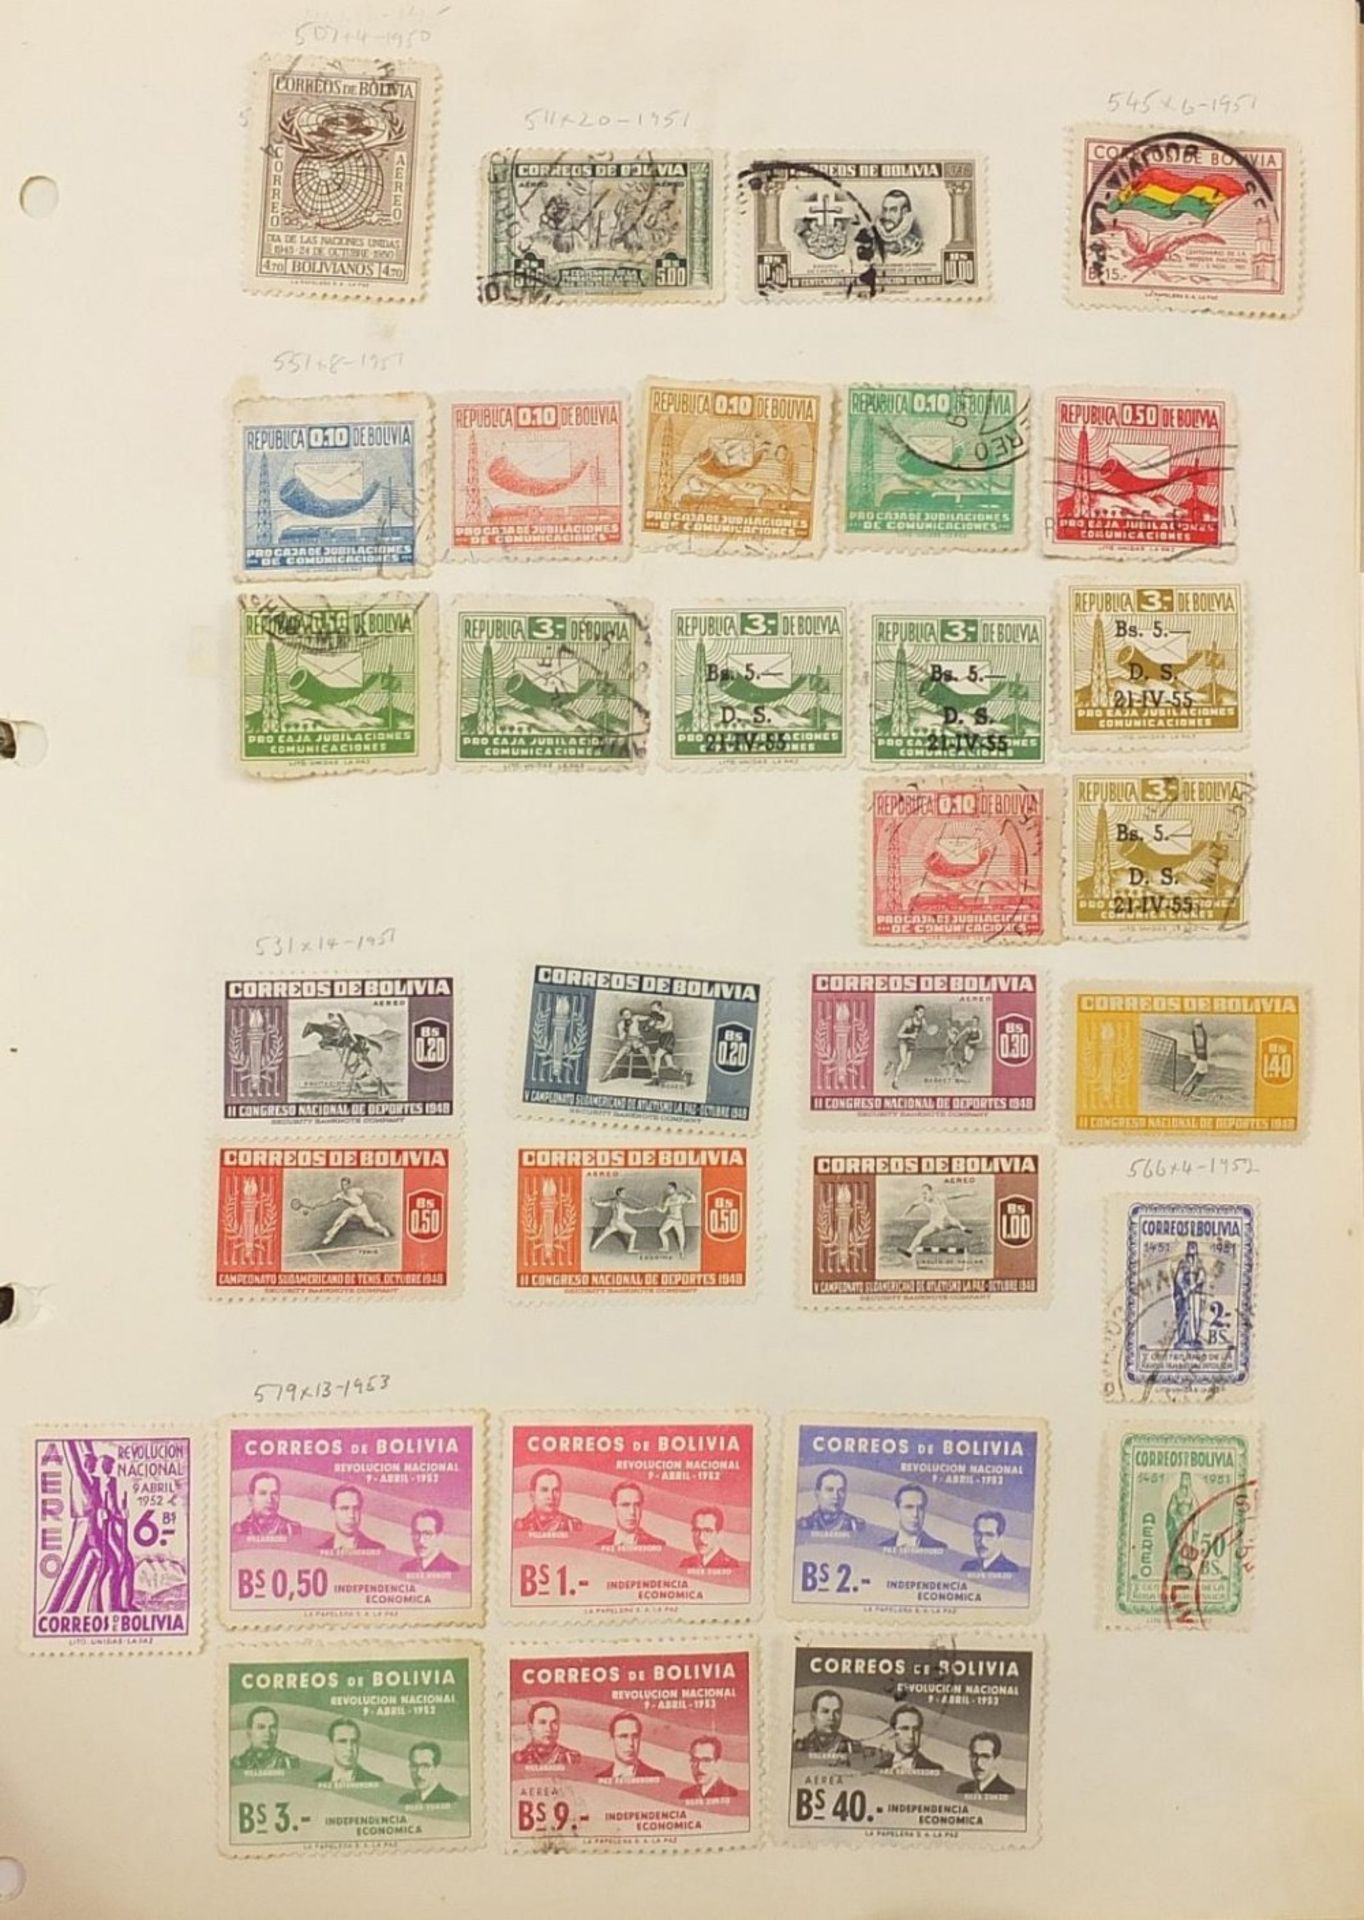 Extensive collection of antique and later world stamps arranged in albums including Brazil, - Image 51 of 52